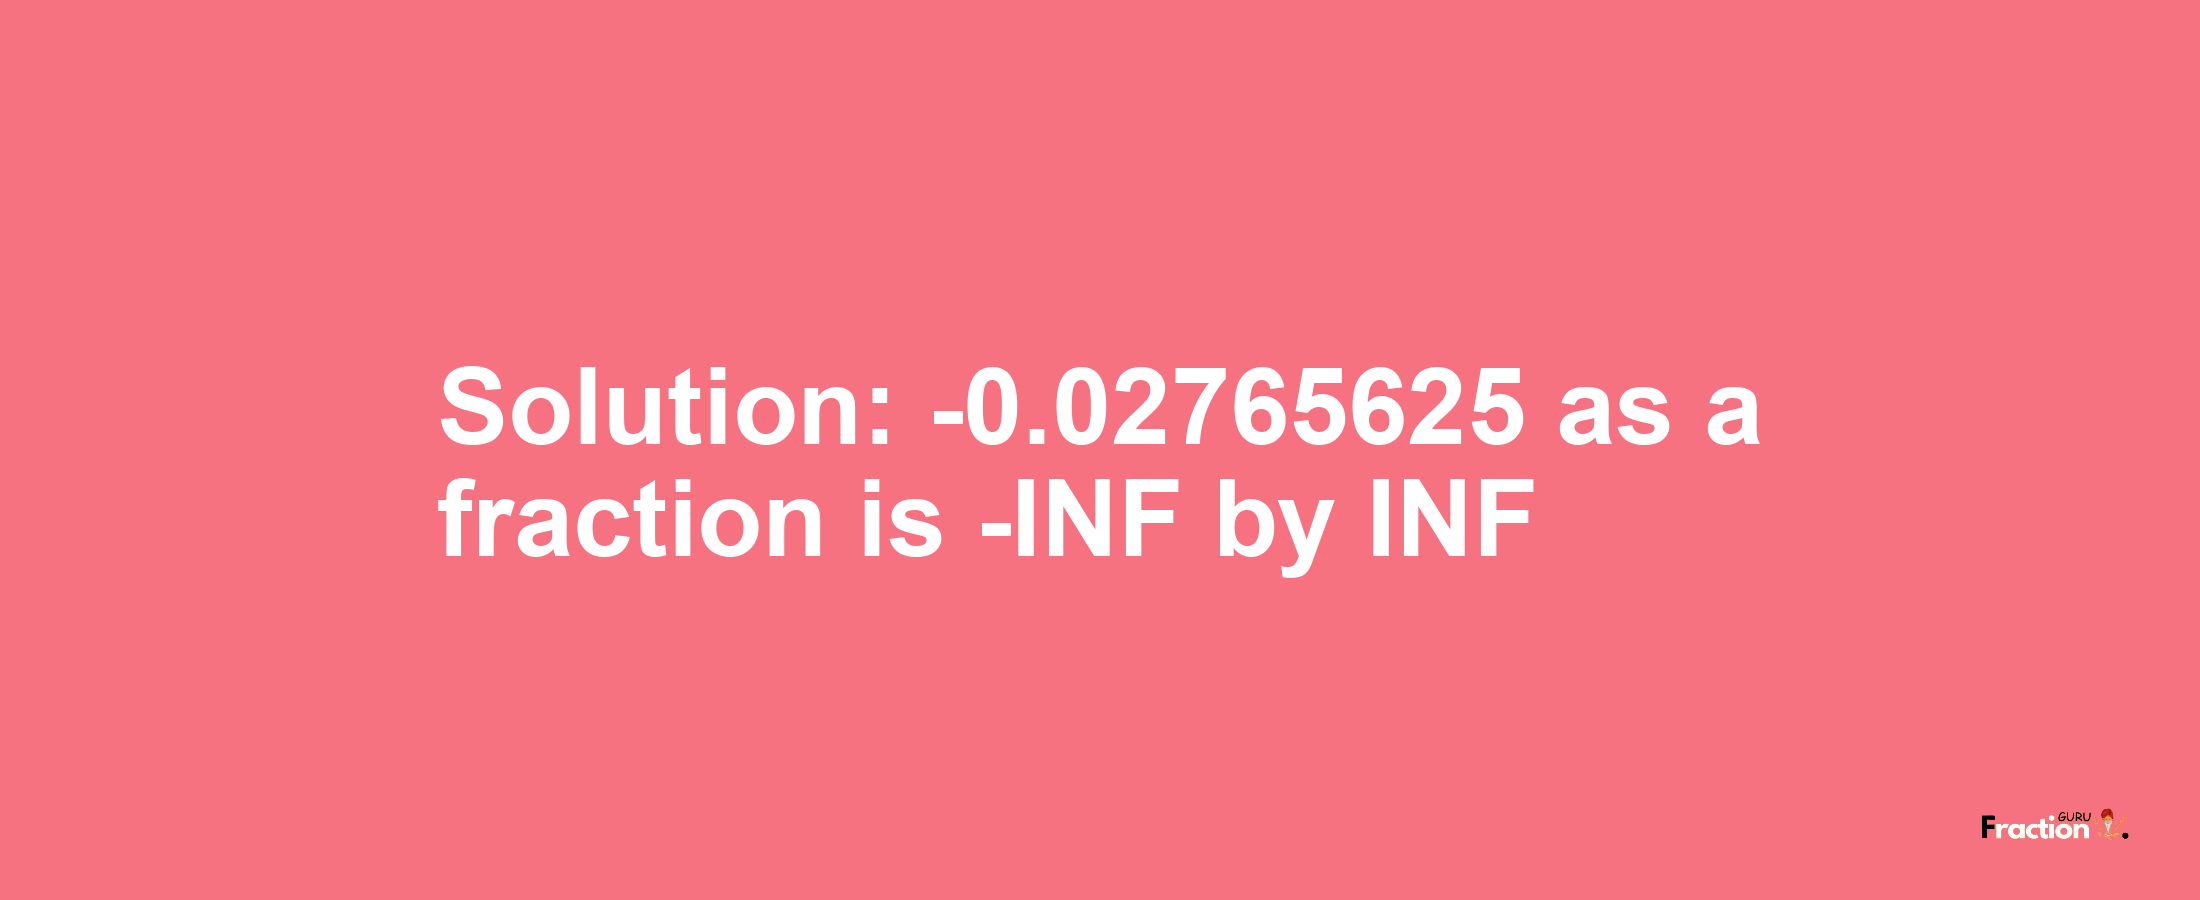 Solution:-0.02765625 as a fraction is -INF/INF